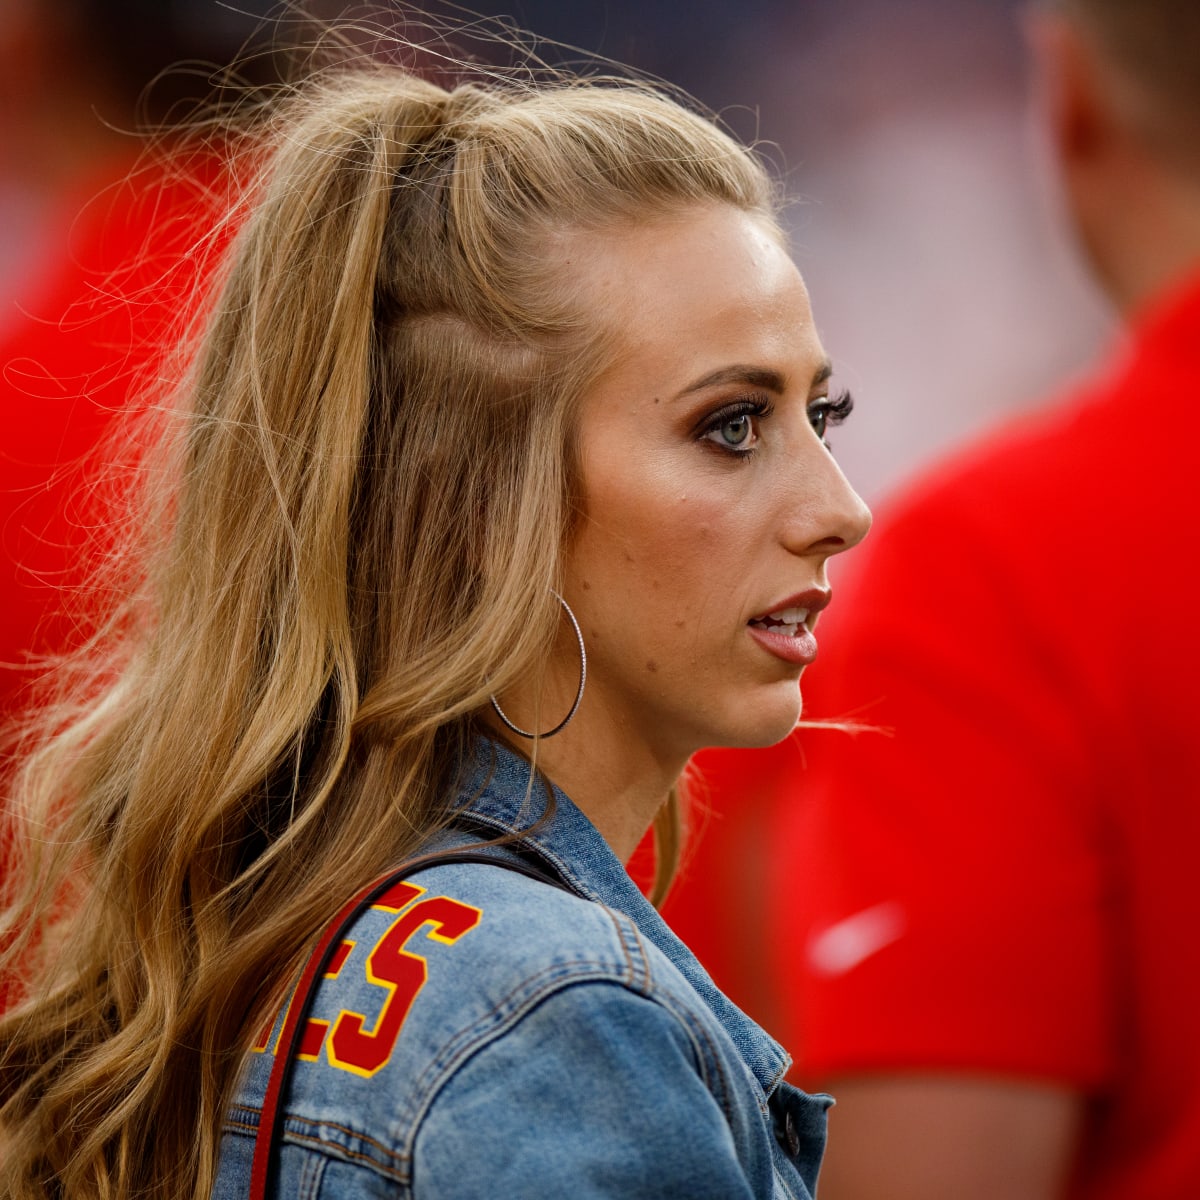 Patrick Mahomes' Wife Turning Heads With See-Through Outfit, The Spun